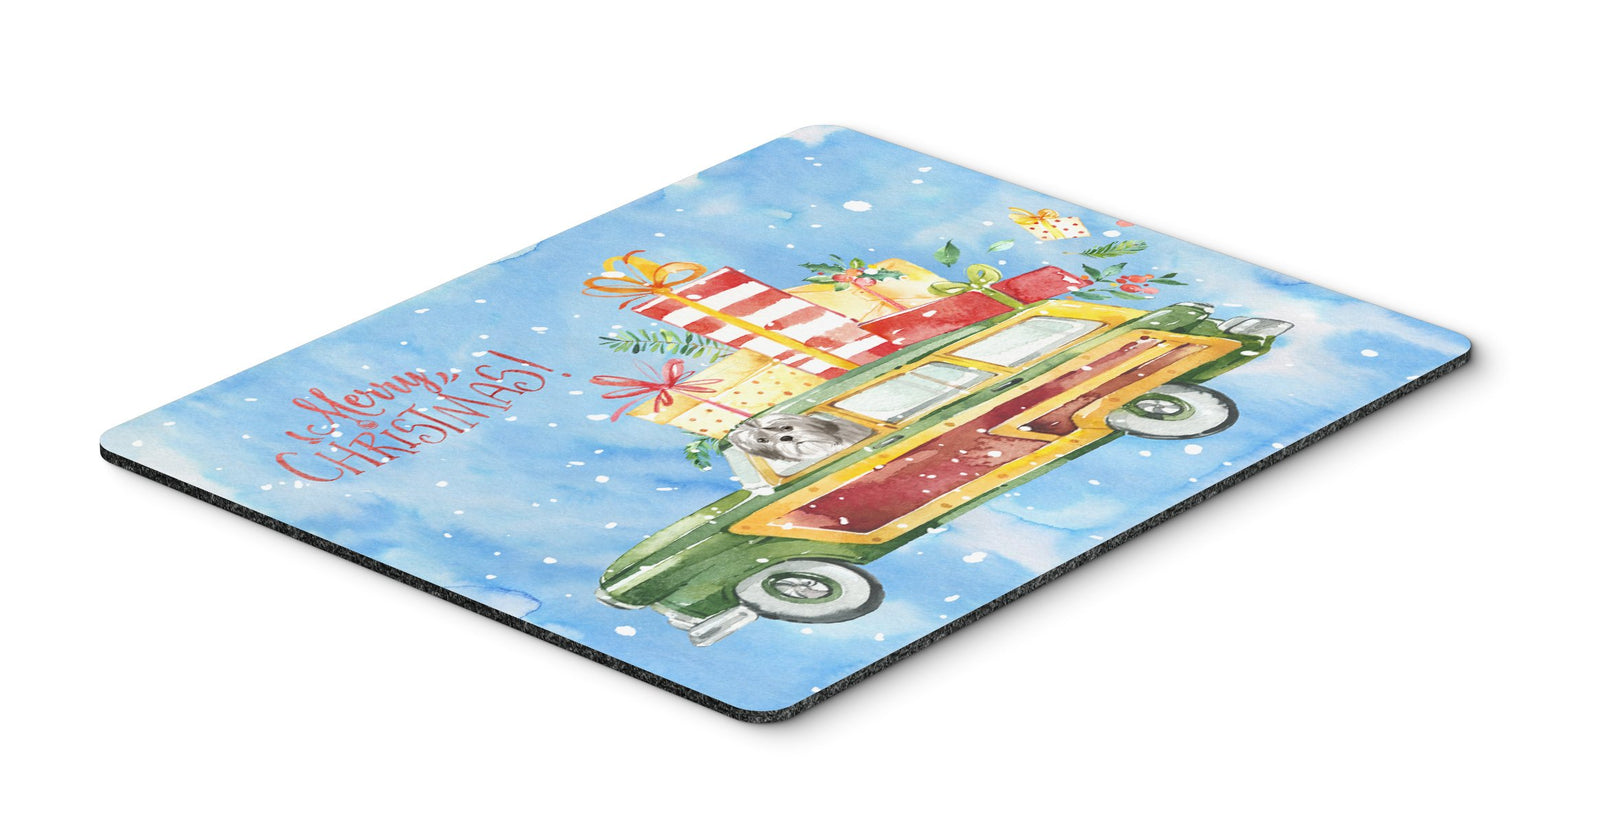 Merry Christmas Shih Tzu Puppy Cut Mouse Pad, Hot Pad or Trivet CK2423MP by Caroline's Treasures